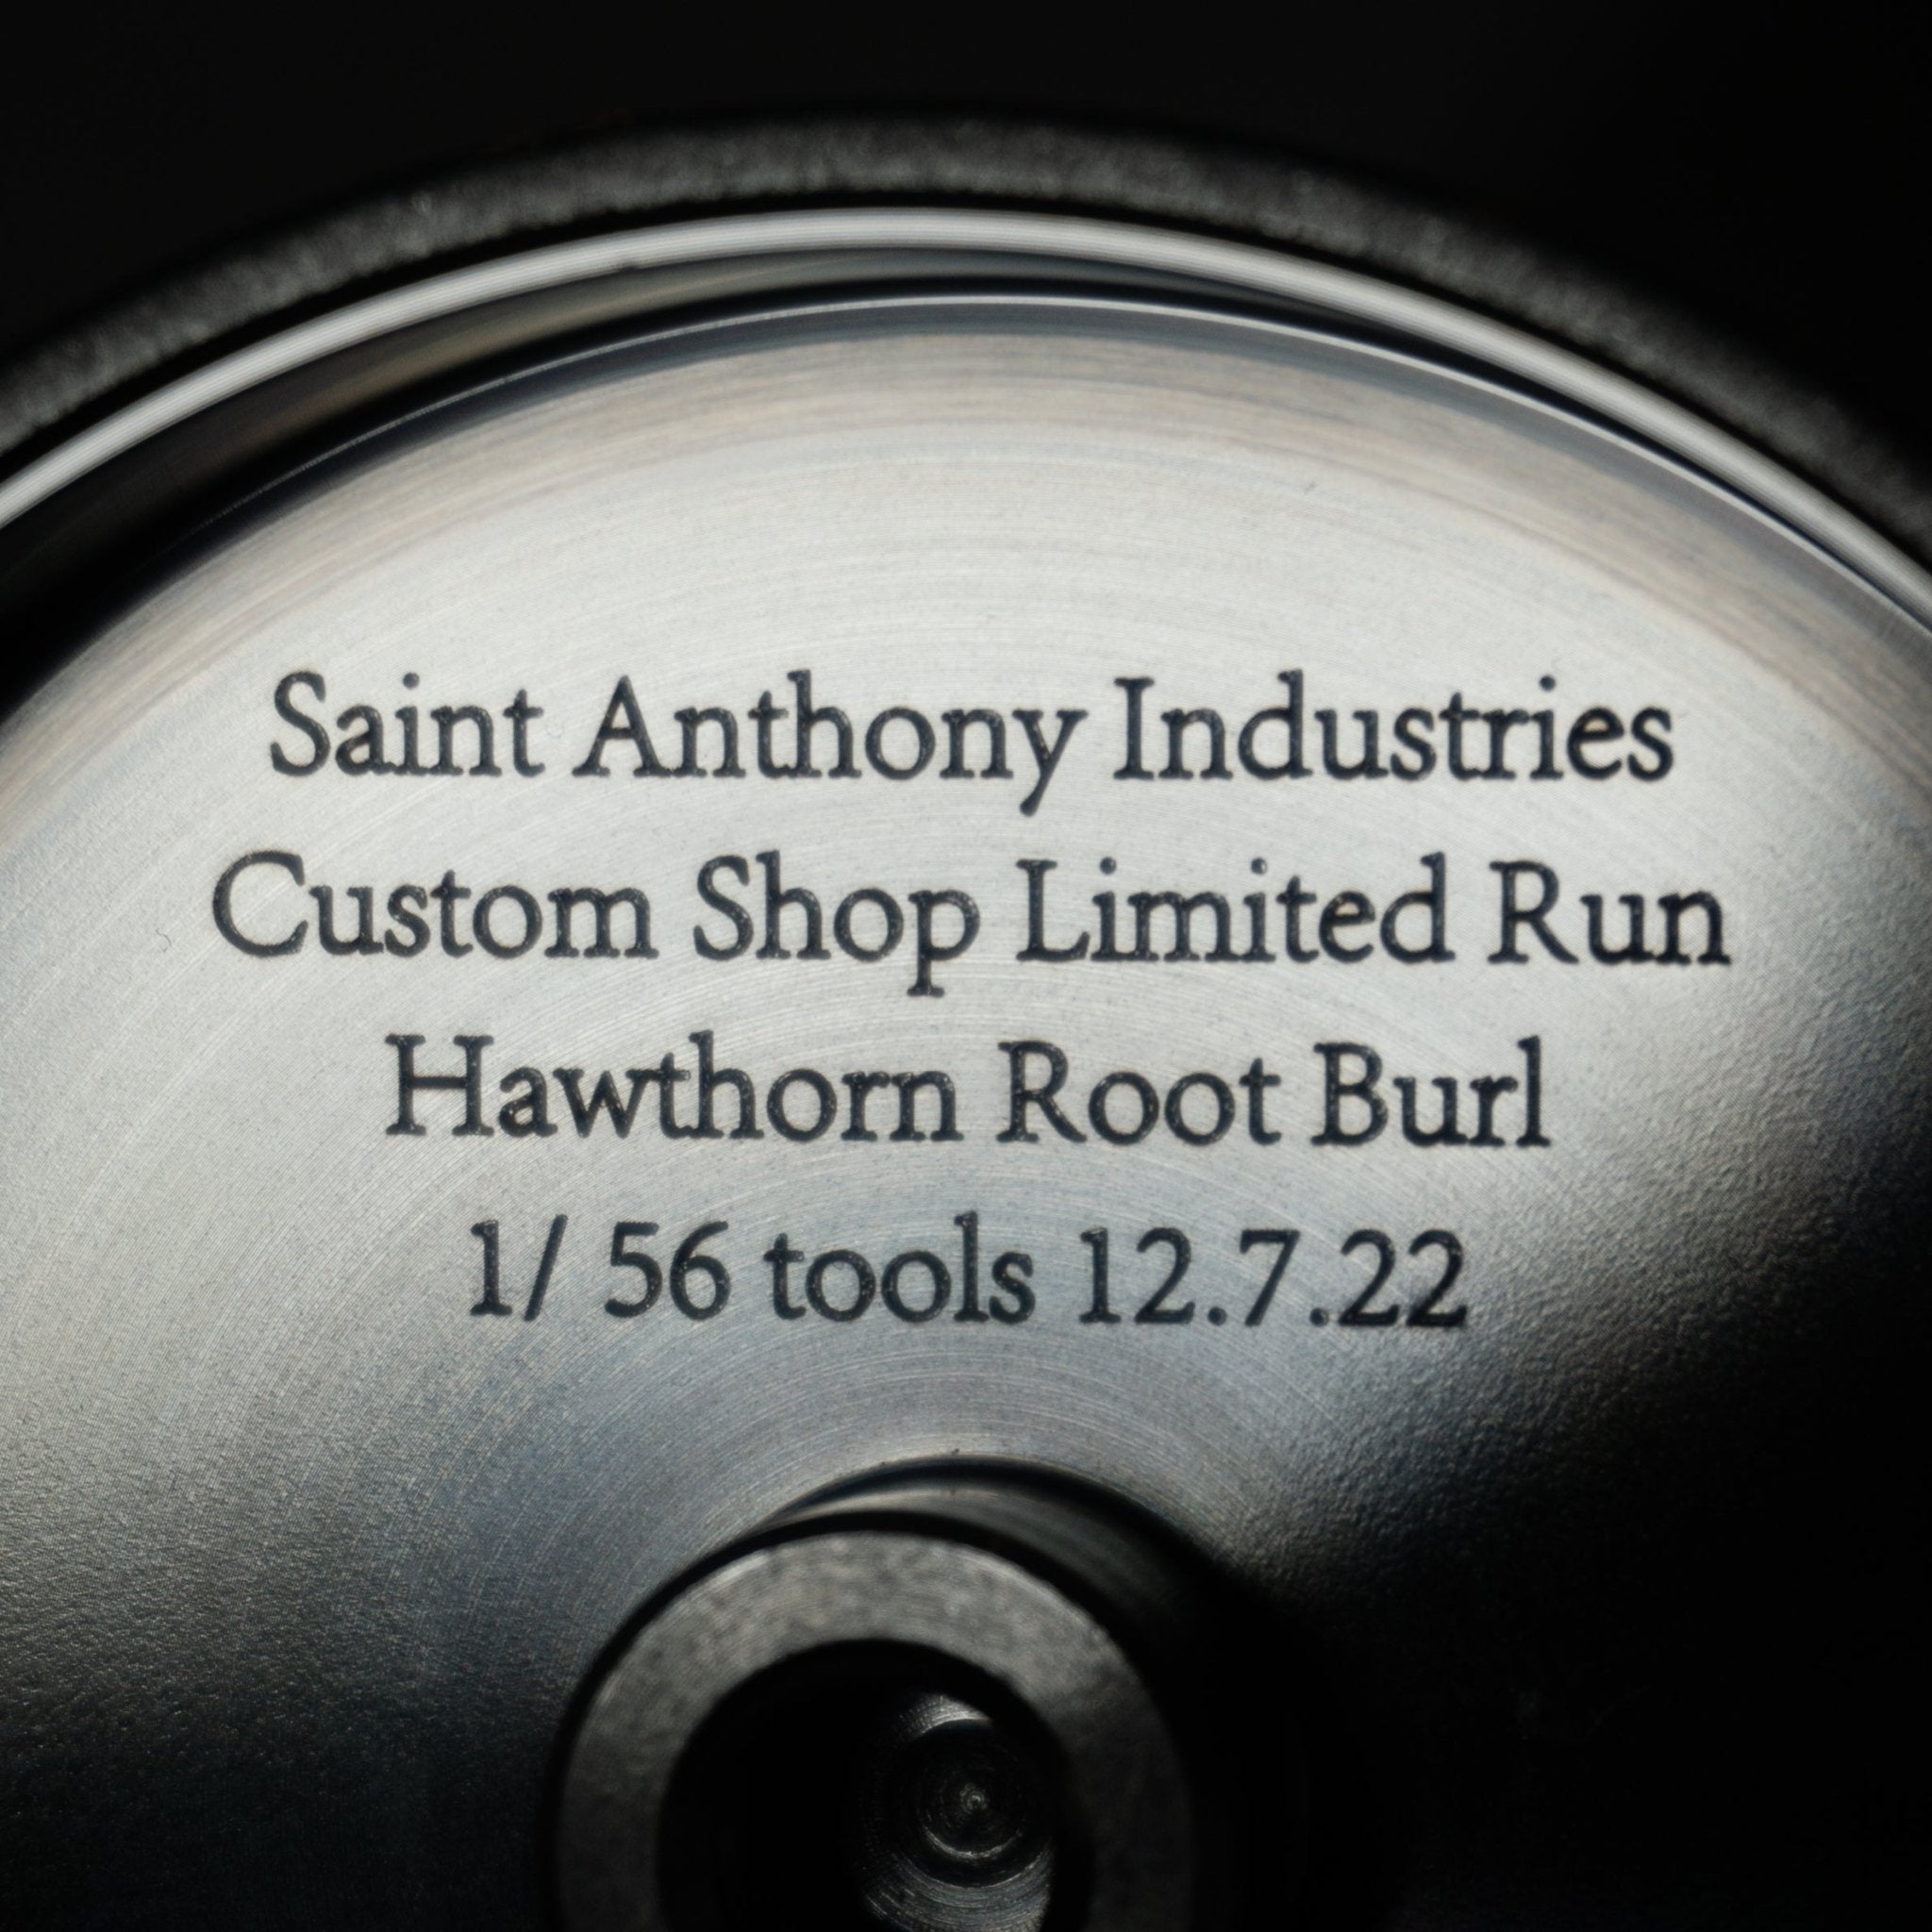 Hawthorn Root Burl BT Wedge Distribution Tool & New Levy - Saint Anthony Industries